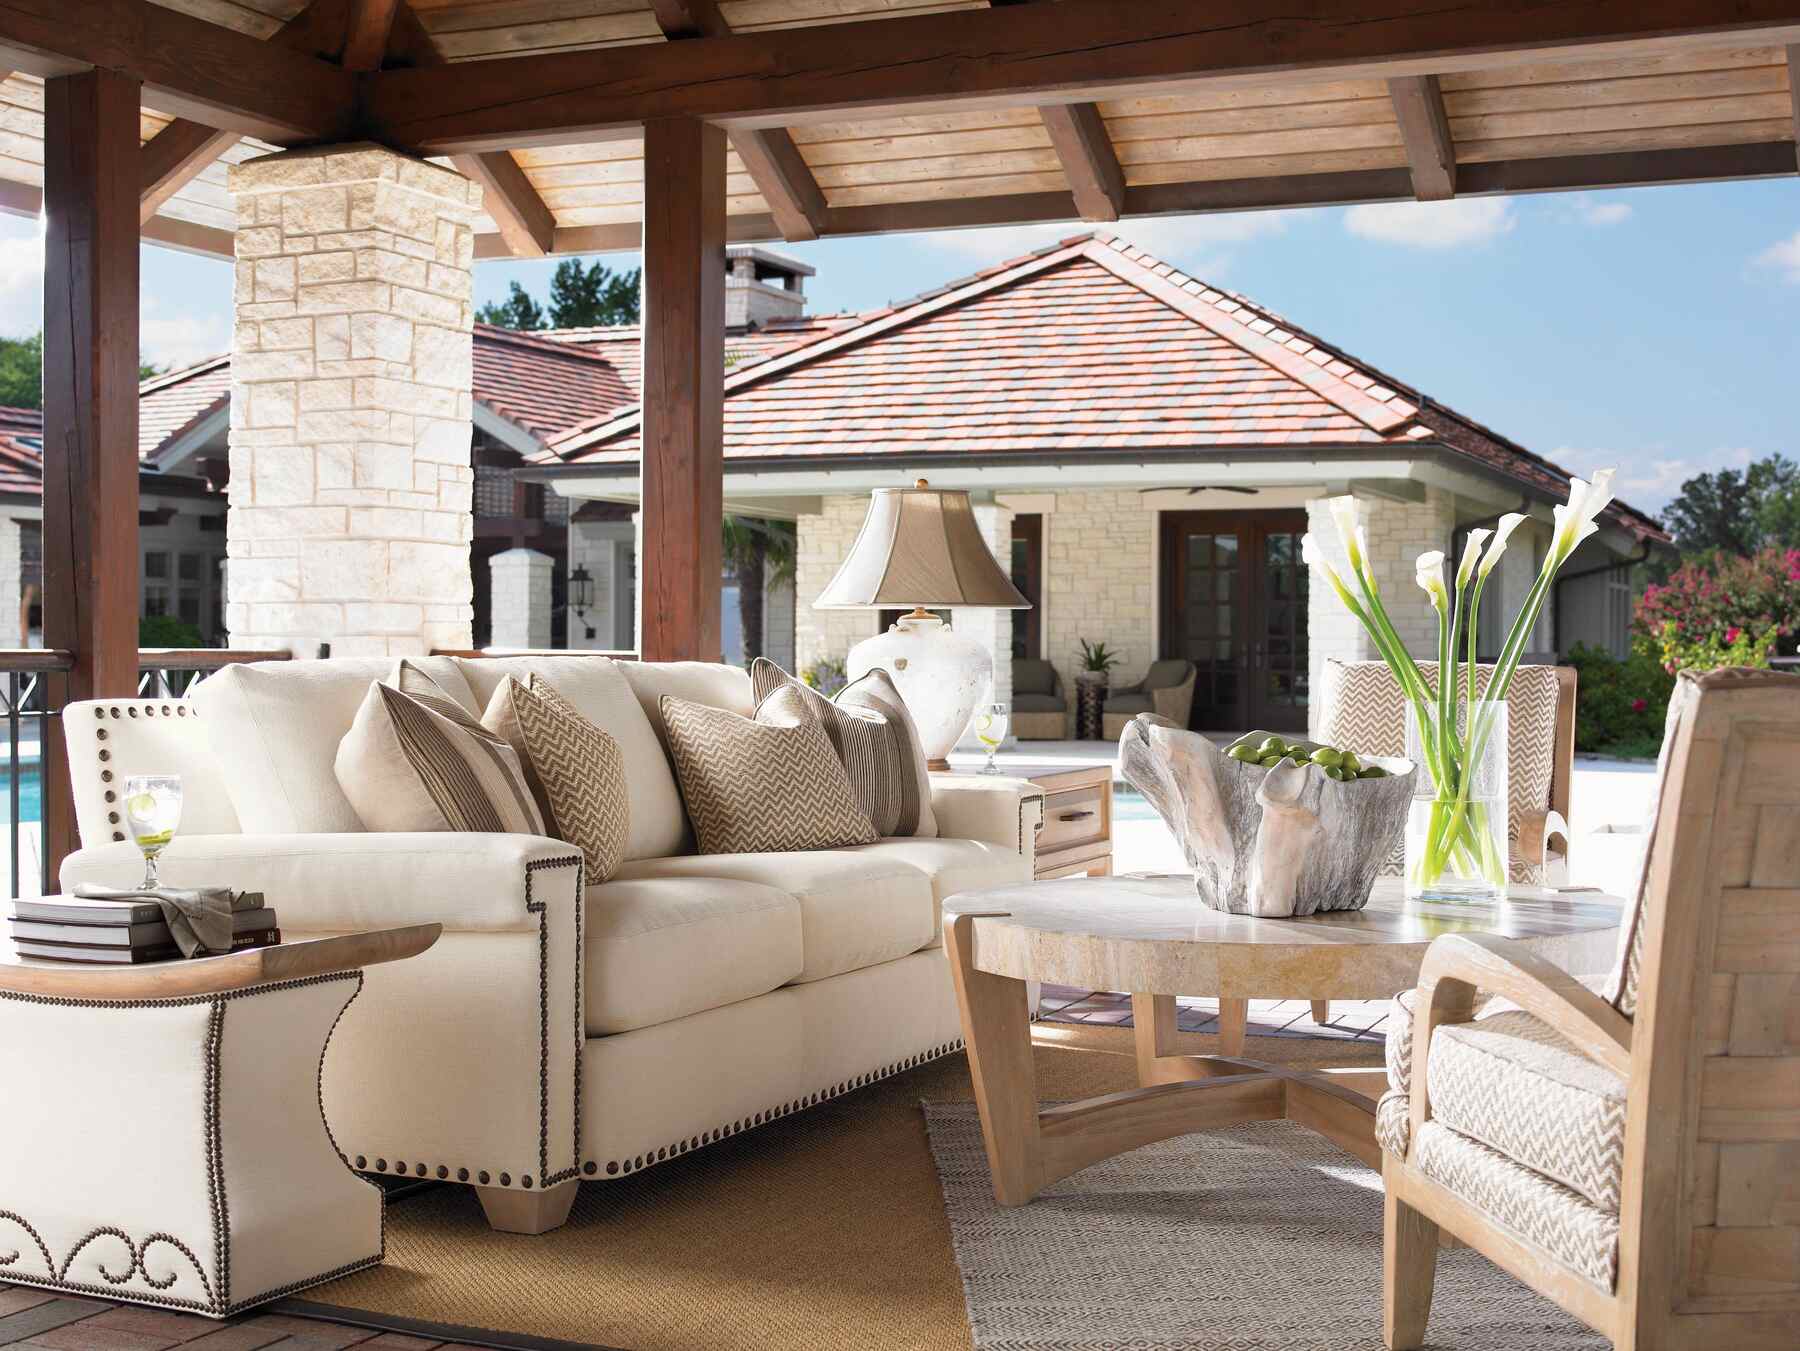 A cozy patio with comfy furniture and a sparkling pool, perfect for relaxing and enjoying the outdoors